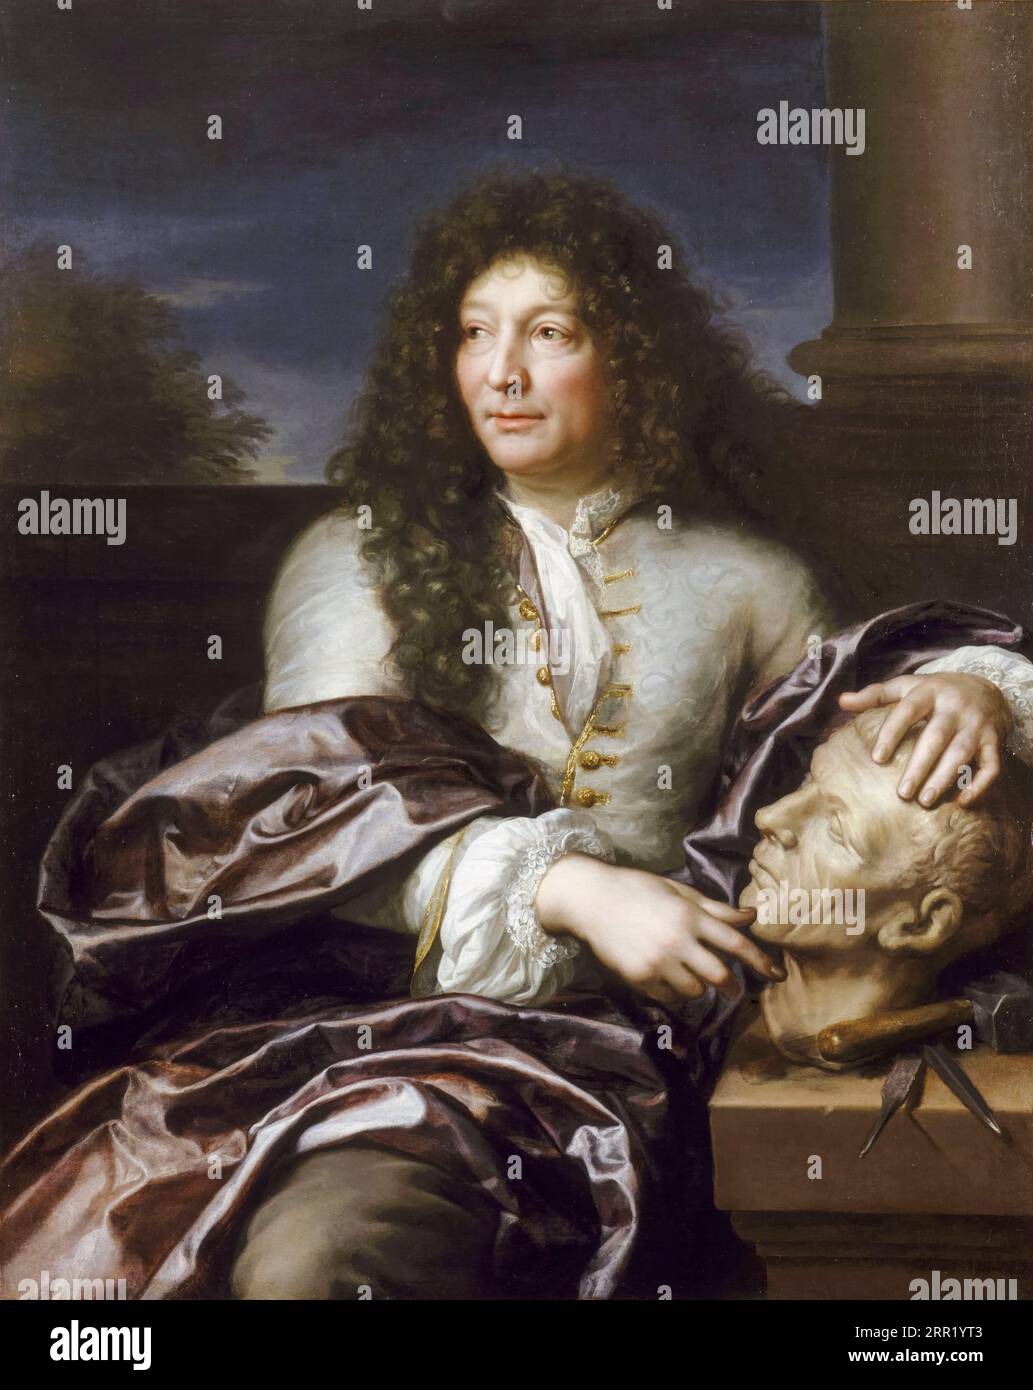 François Girardon (1628-1715), French sculptor of the Louis XIV style (French Baroque), portrait painting in oil on canvas by Gabriel Revel, 1682-1683 Stock Photo